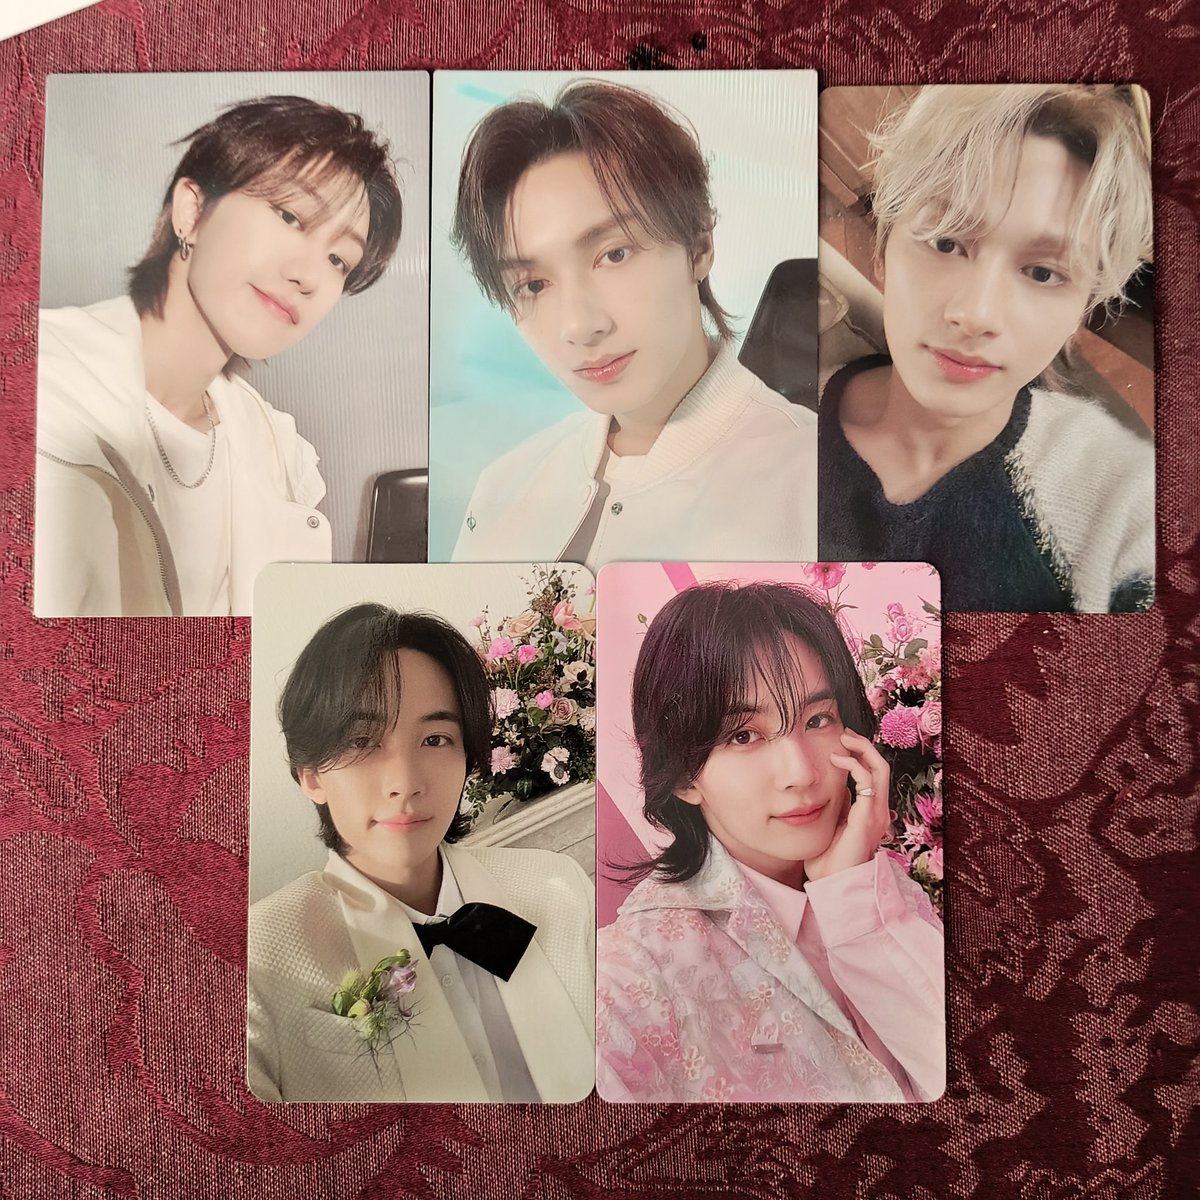 💌
╰┈➤ ✦* ˚ #Annehuesmail * ˚ ✦

Happy mail indeed! Would you believe that I got it for only 500 php??!!! All thanks to you, ate @adksjh! Same with my Jun fml pob. 🥺 He's home and 1 more to go, complete na sila sa 4p ko. 🥺 

JH Always yours agenda is finally open. 🥺🩷